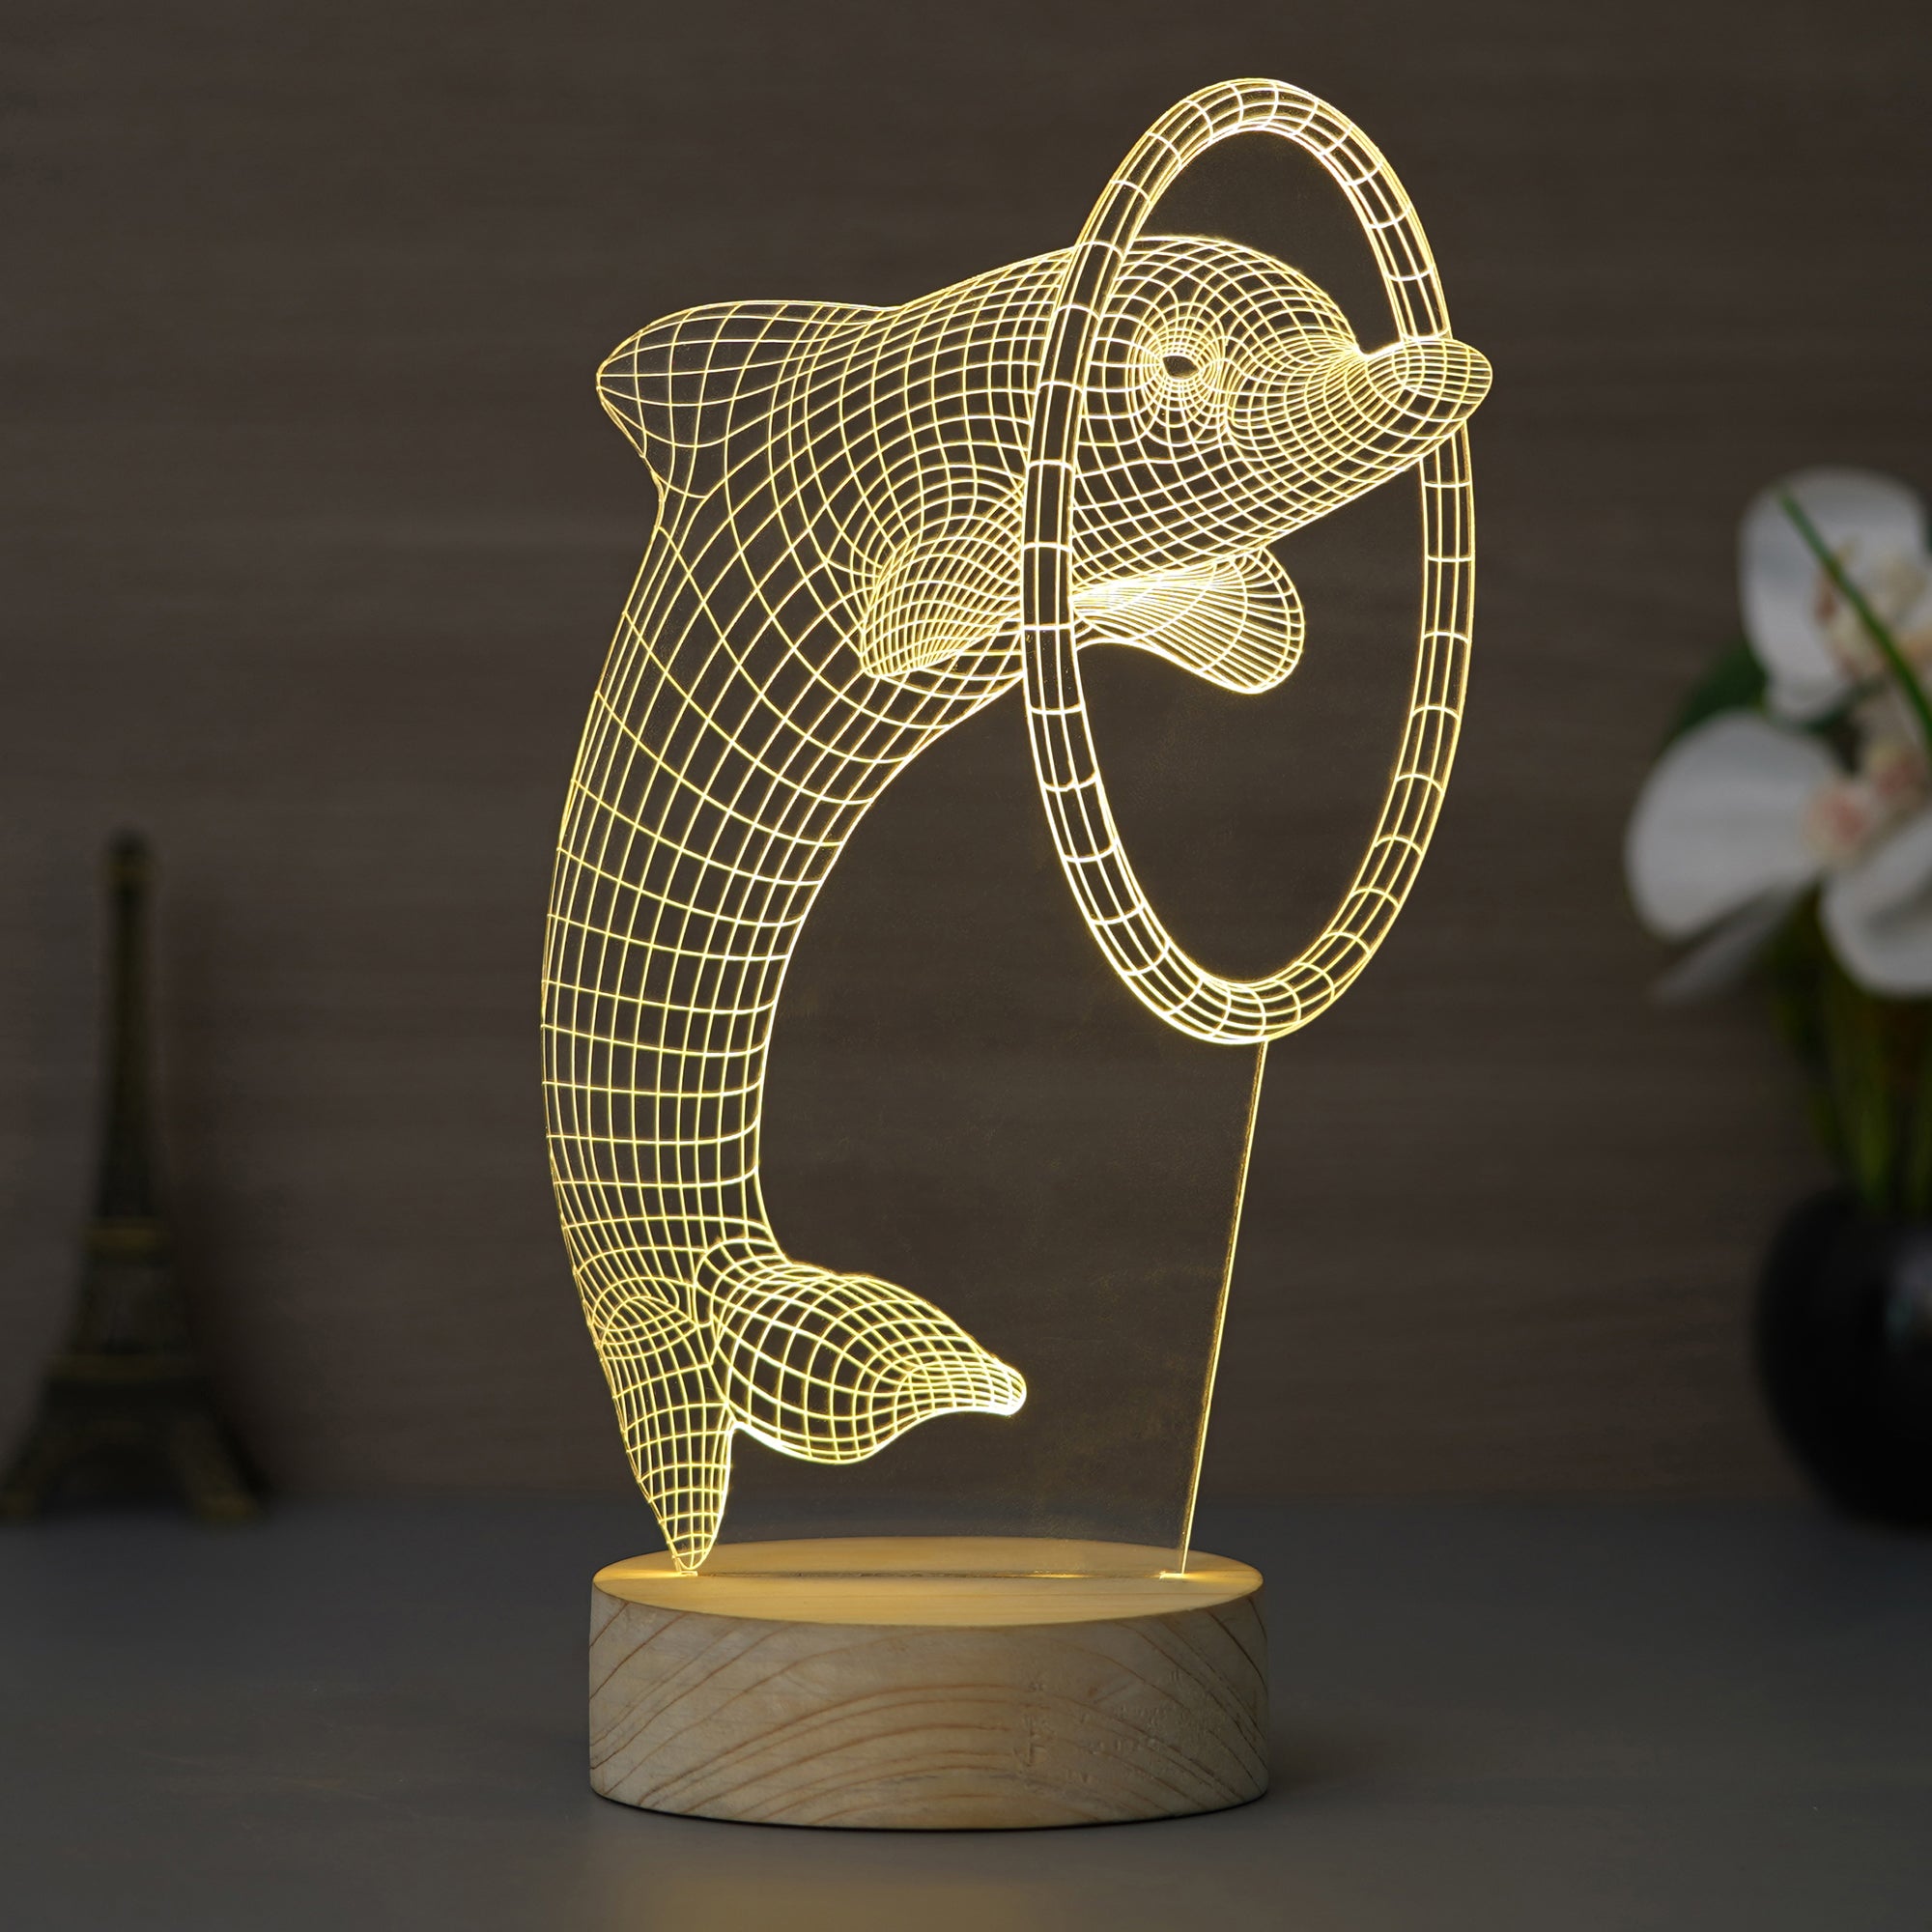 Dolphin Design Carved on Acrylic & Wood Base Night Lamp